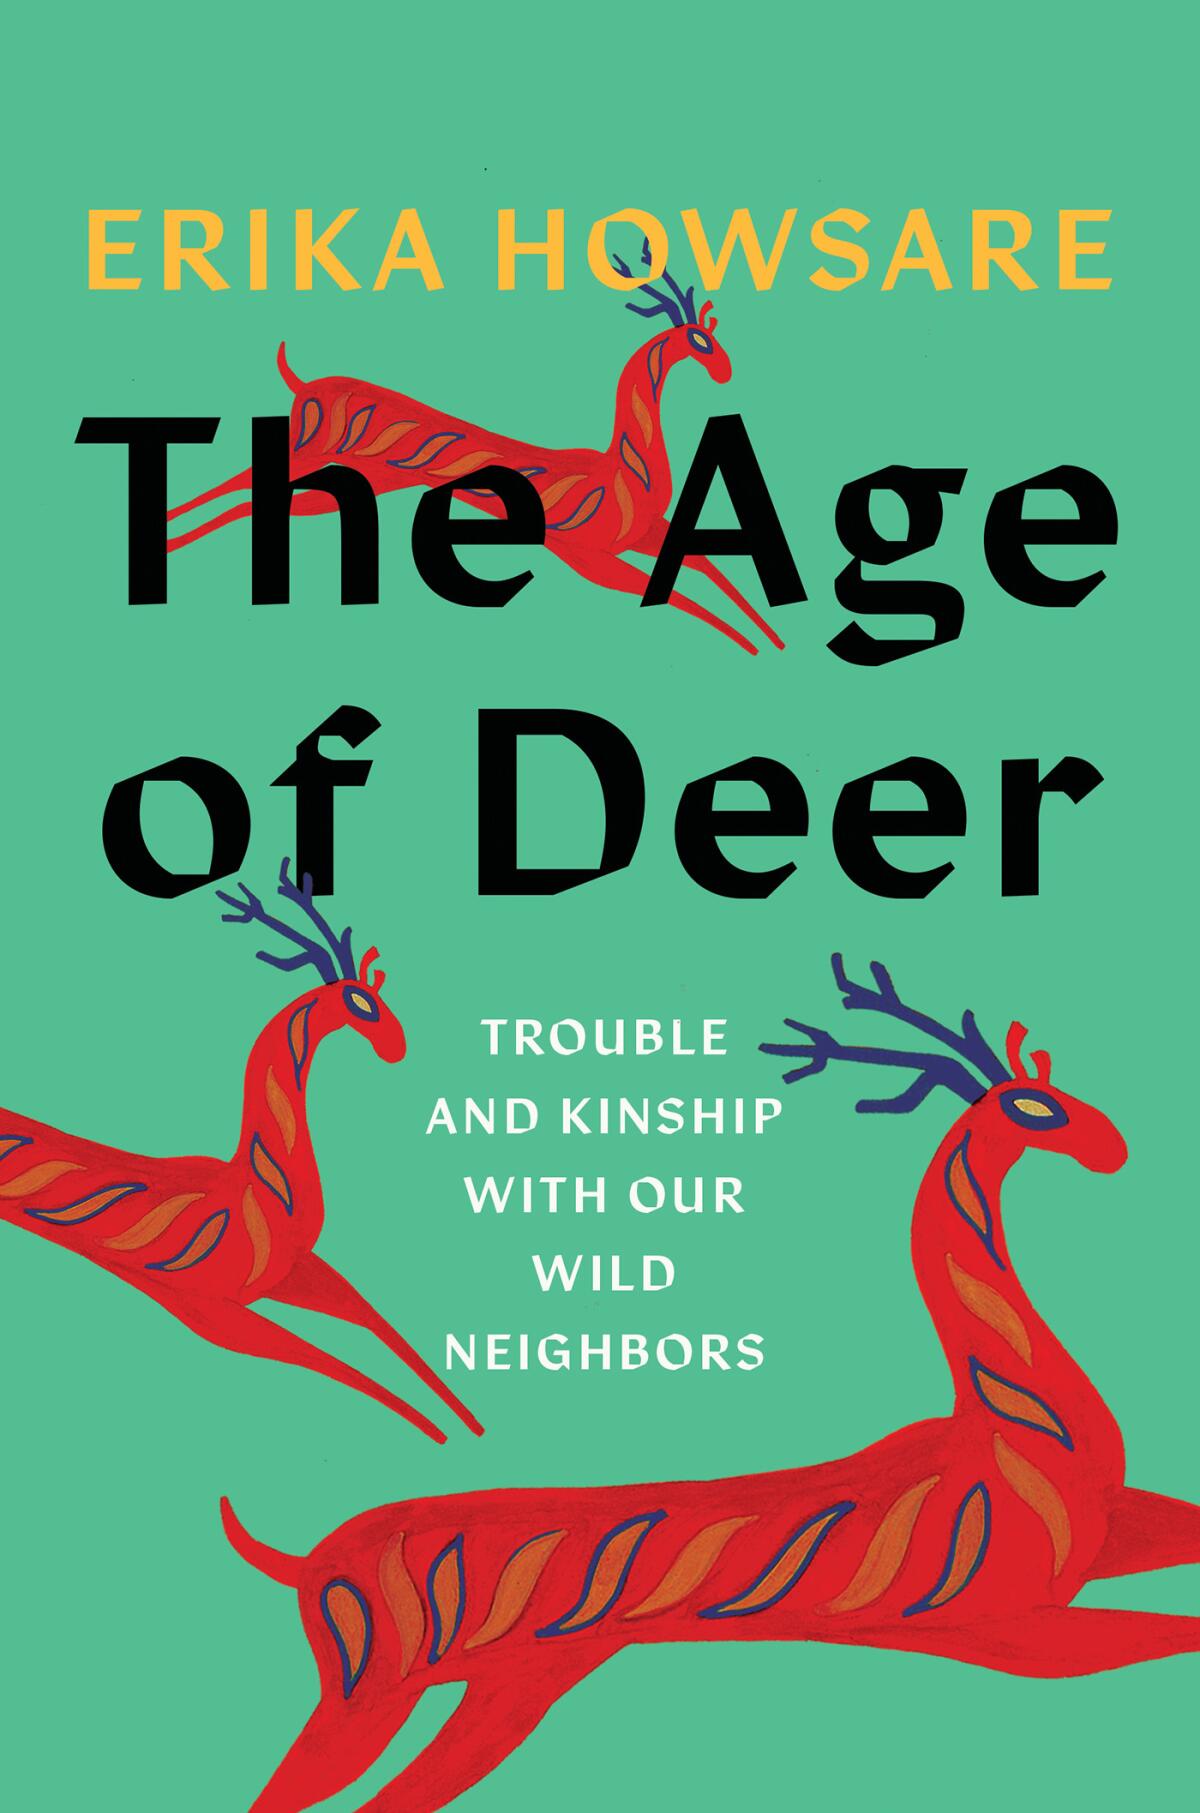 The cover of the book "The Age of Deer," by Erika Howsare, features red deer on a green background